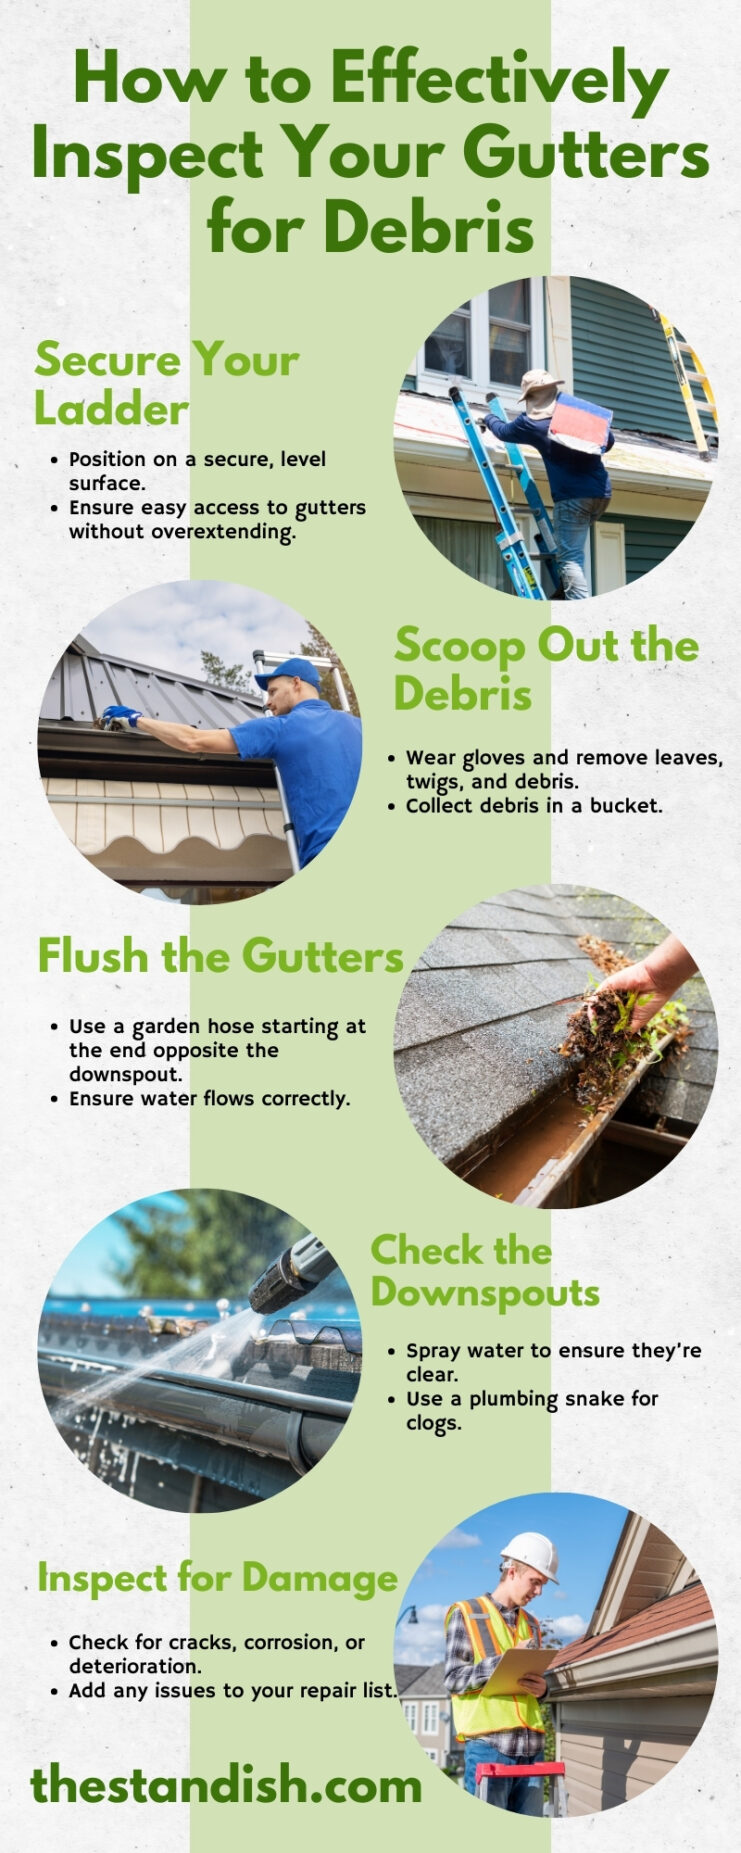 How to Effectively Inspect Your Gutters for Debris Infographic